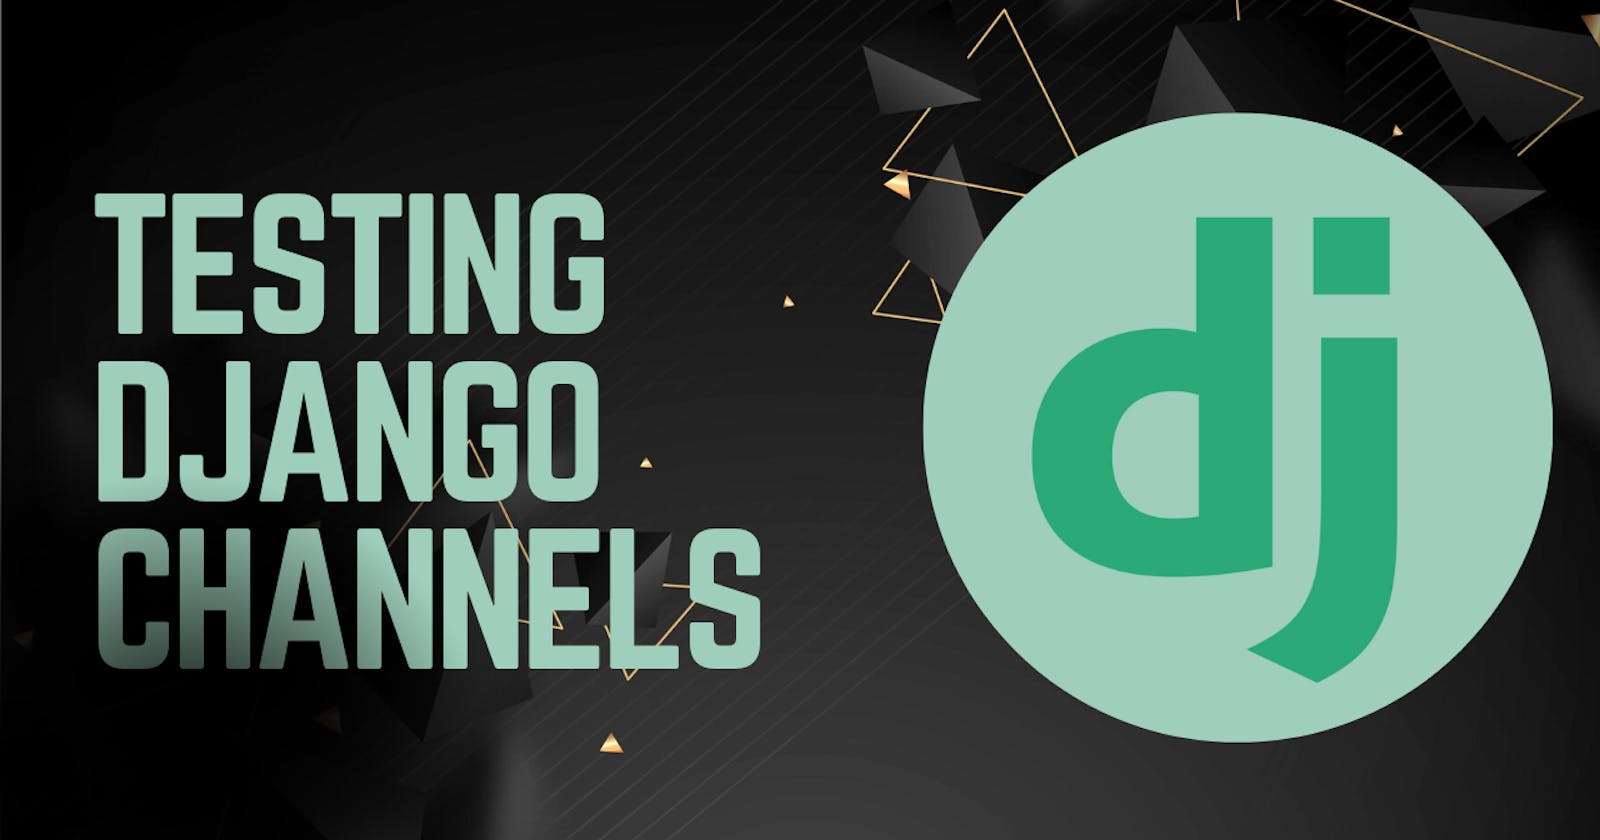 Authenticating User while testing websocket using Django Channels